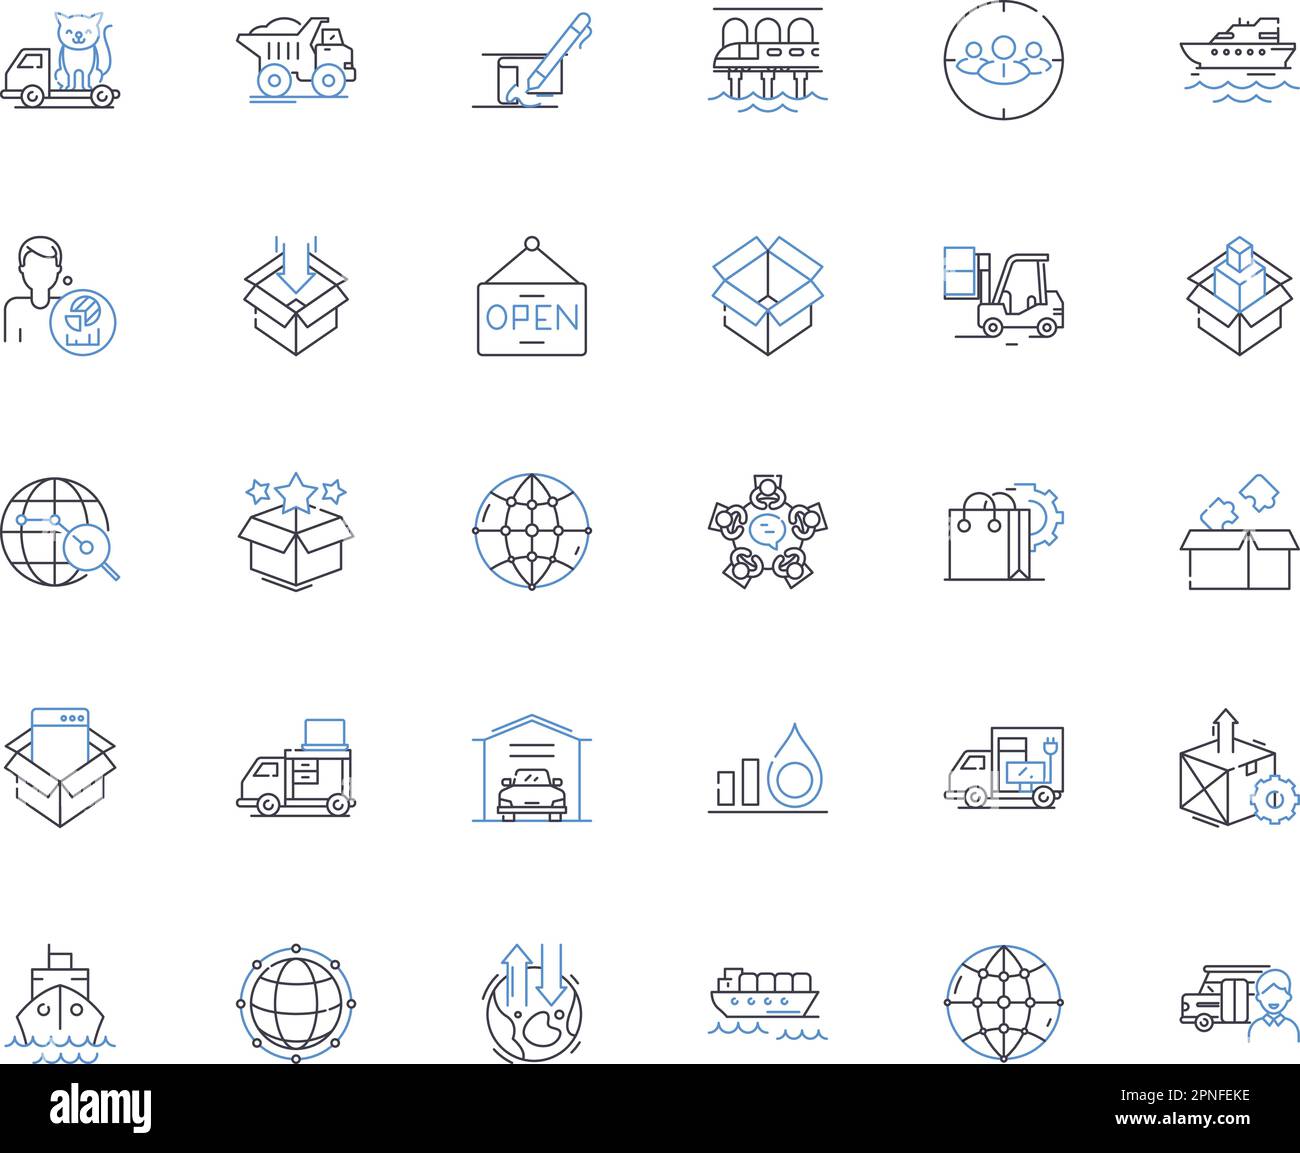 Shipping strategy line icons collection. Logistics, Distribution, Fulfillment, Warehouse, Transportation, Freight, Routing vector and linear Stock Vector